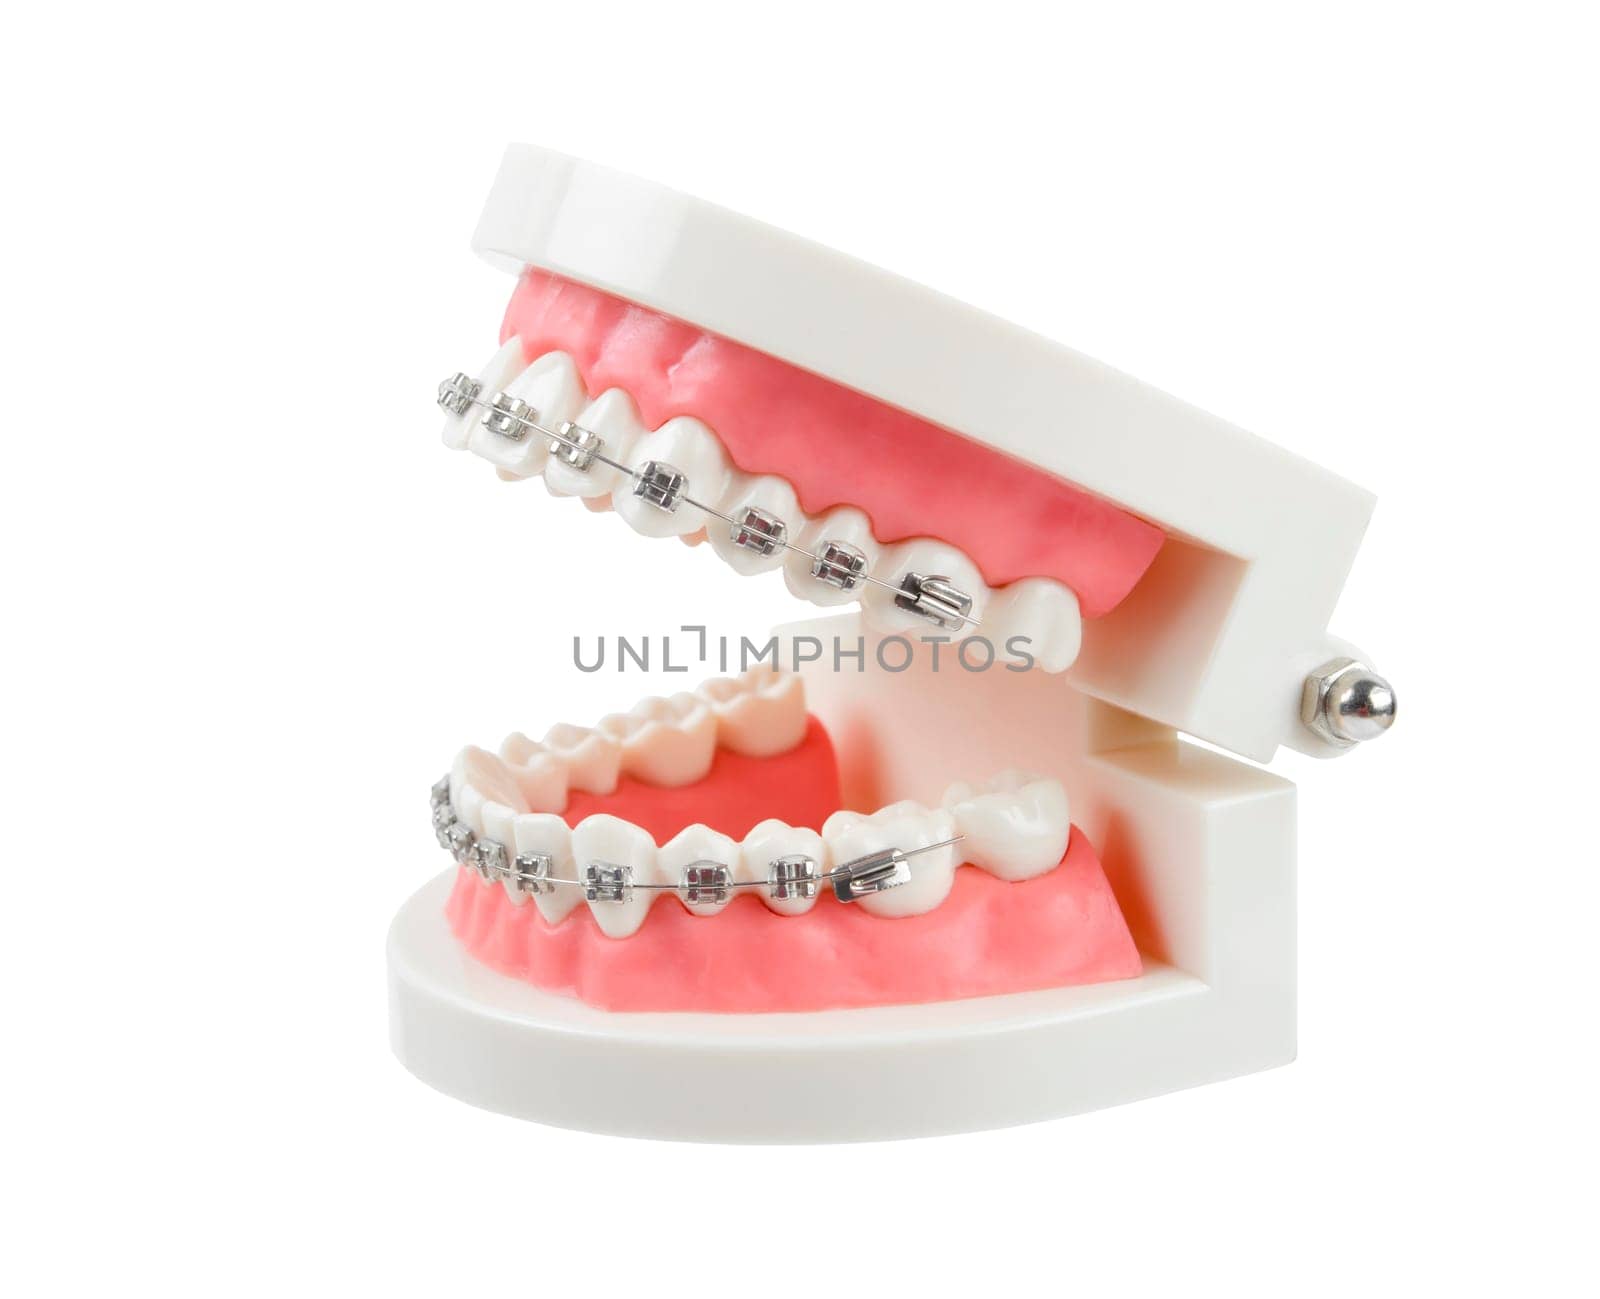 The Teeth model with metal wire dental braces or dental instruments isolated on white background, Save clipping path. by Gamjai